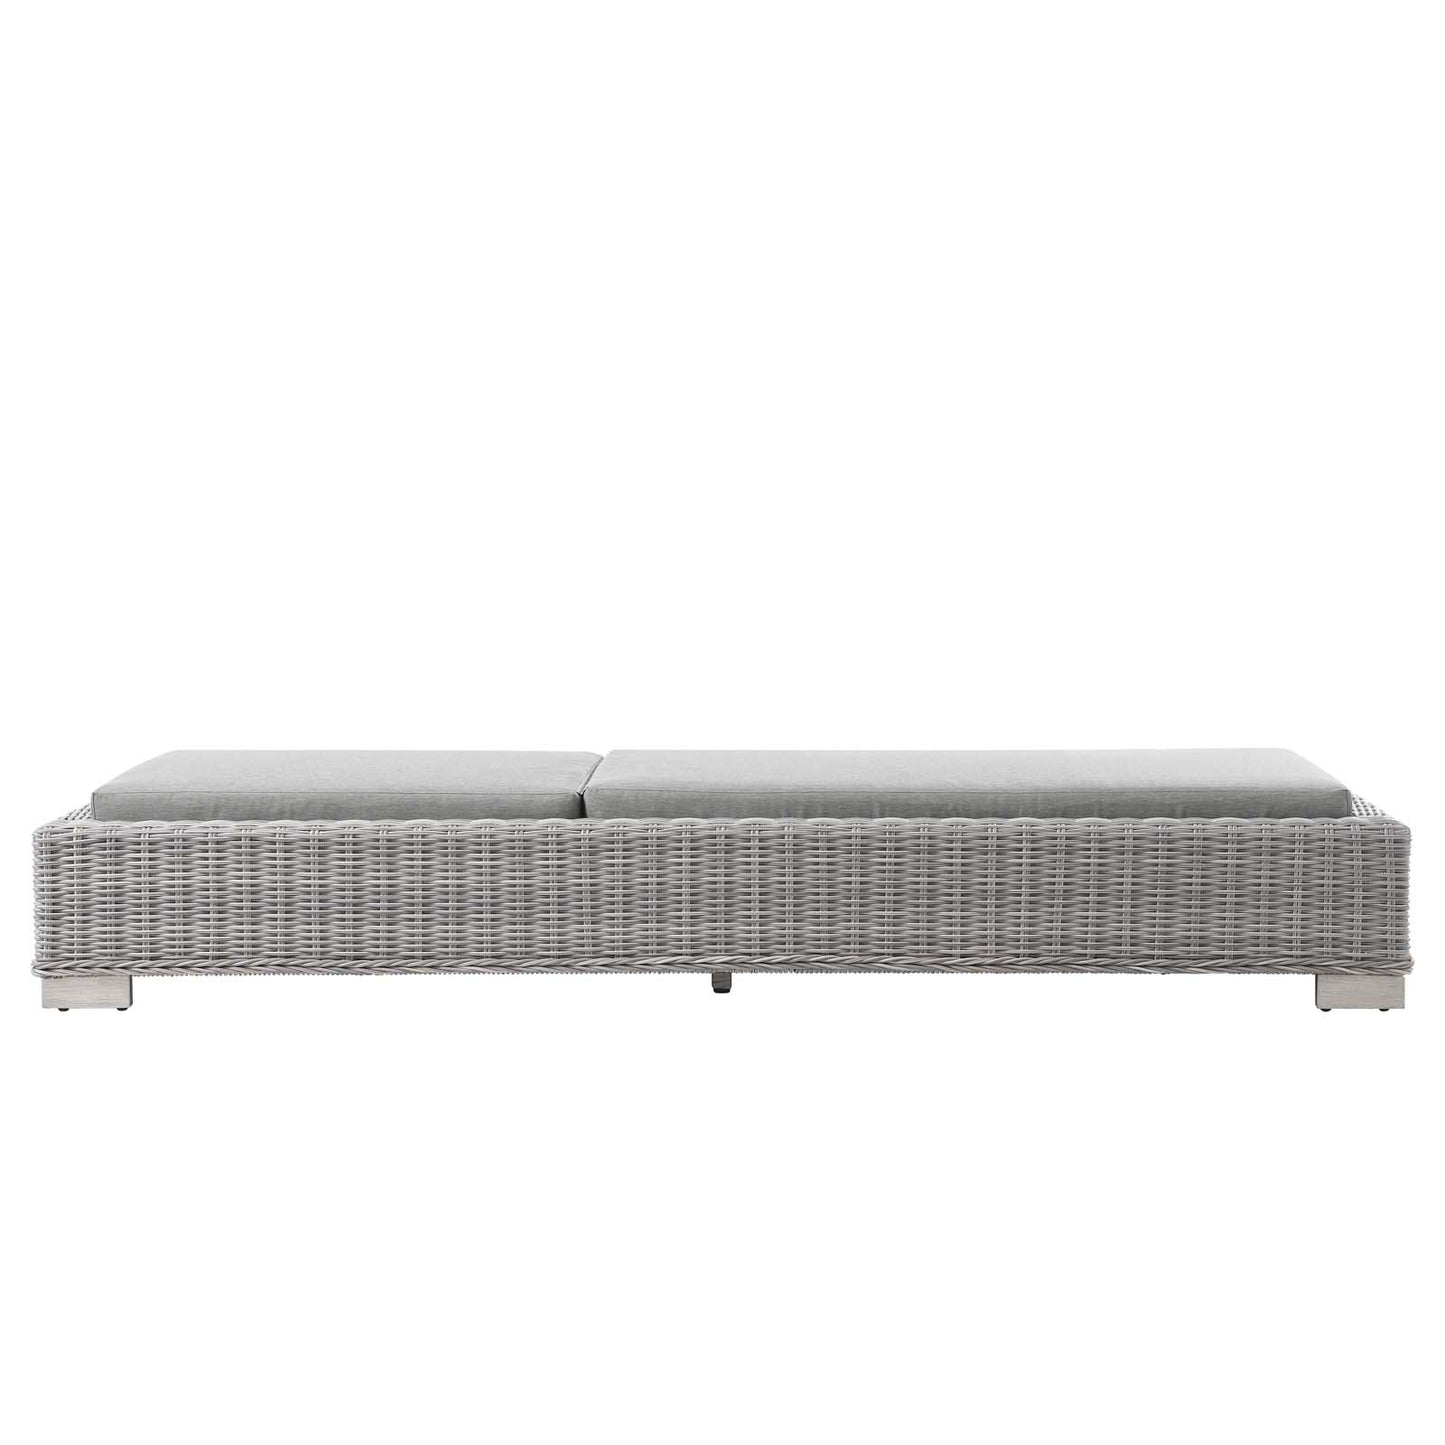 Conway Outdoor Patio Wicker Rattan Chaise Lounge